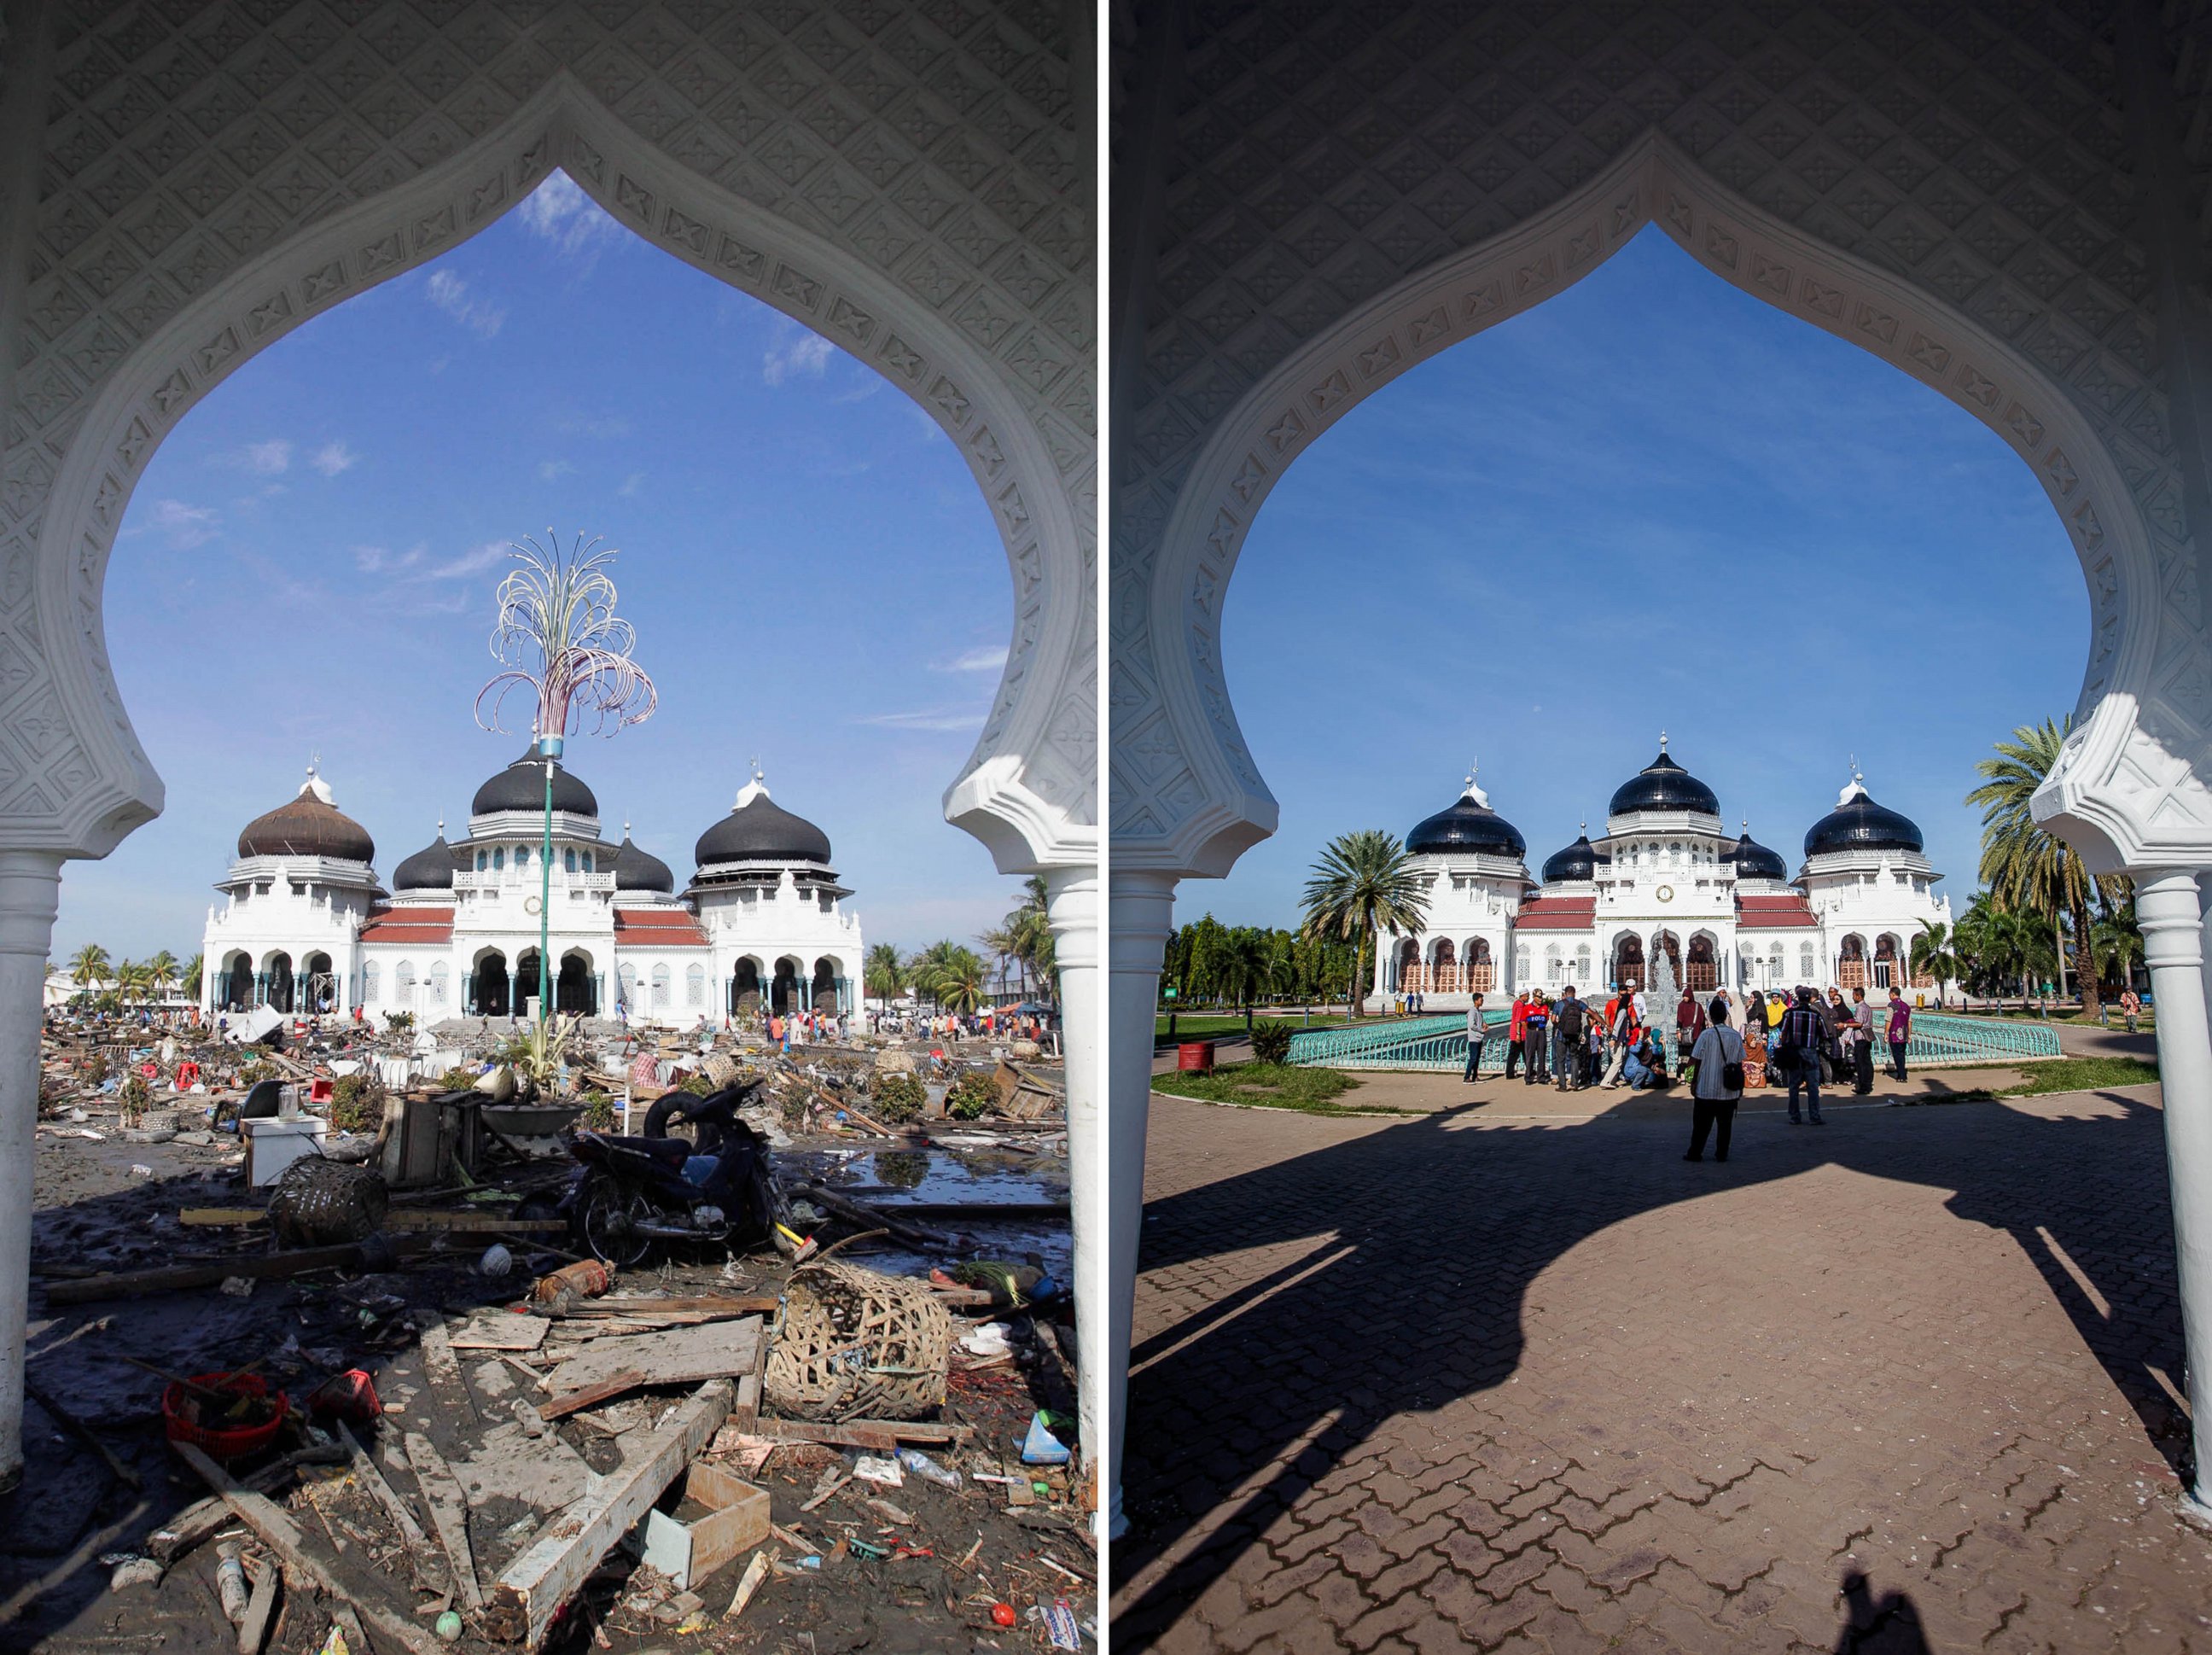 This combo shows a file photo (left) taken on Dec. 28, 2004 of the Grand Mosque surrounded by debris in Banda Aceh, Indonesia where the massive Dec. 26, 2004 tsunami triggered by an earthquake hit and an image of people visiting the mosque on Dec. 11, 2014. Image: ABC News